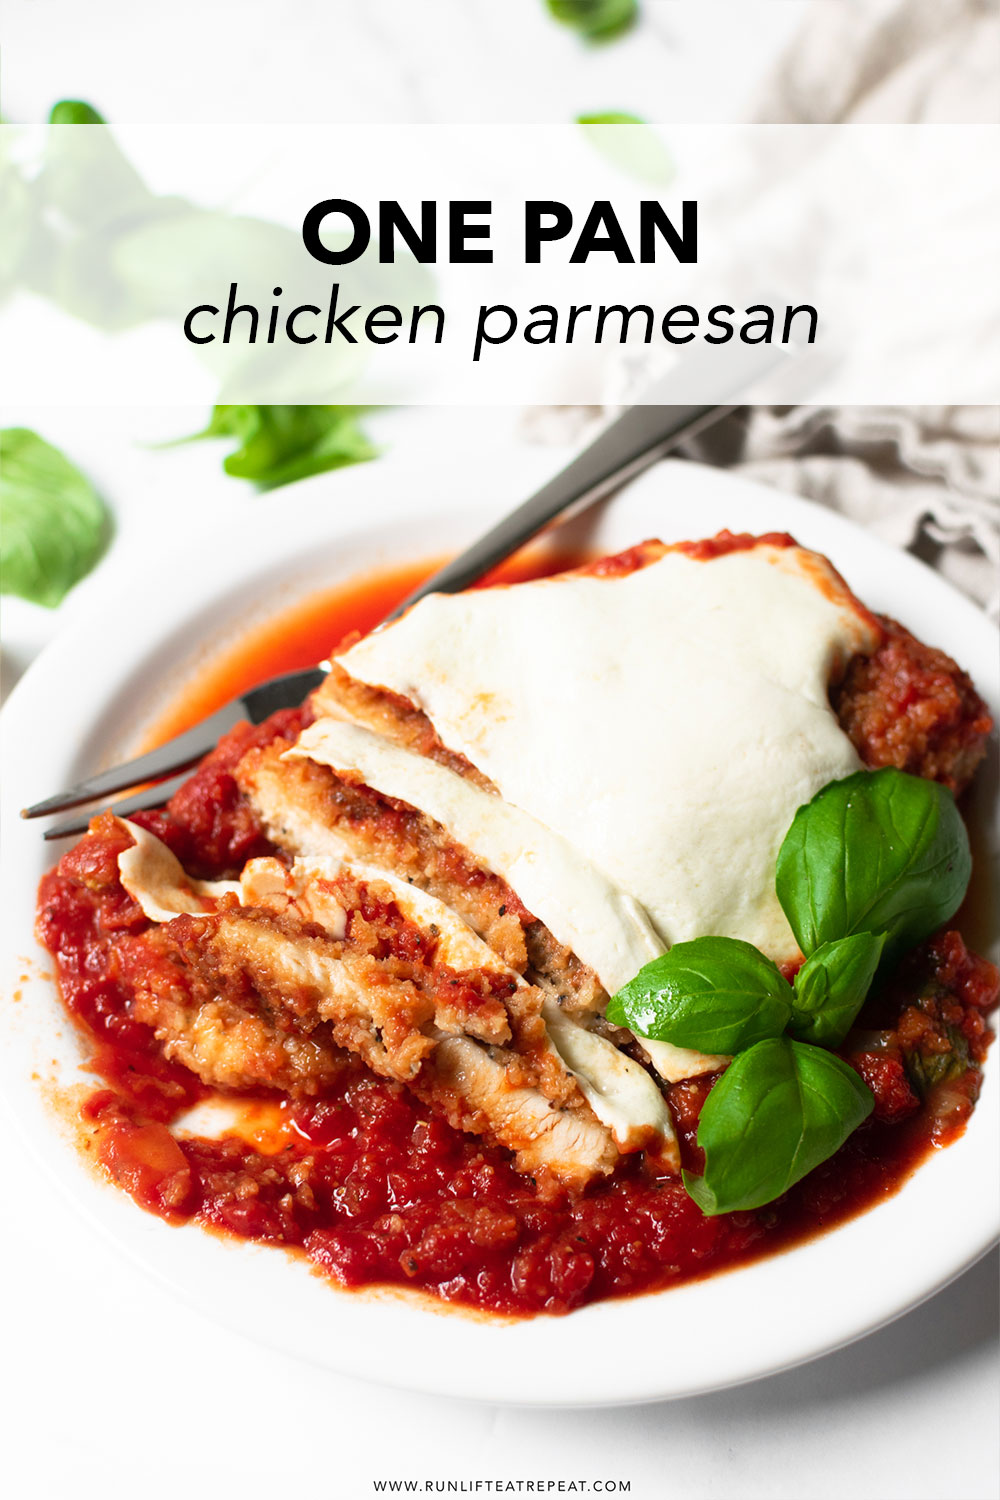 Learn how to make chicken parmesan at home in just 35 minutes! It's made with basic ingredients and smothered in flavorful marinara sauce, topped with fresh mozzarella cheese. It's the easiest chicken parmesan recipe that you'll ever make!